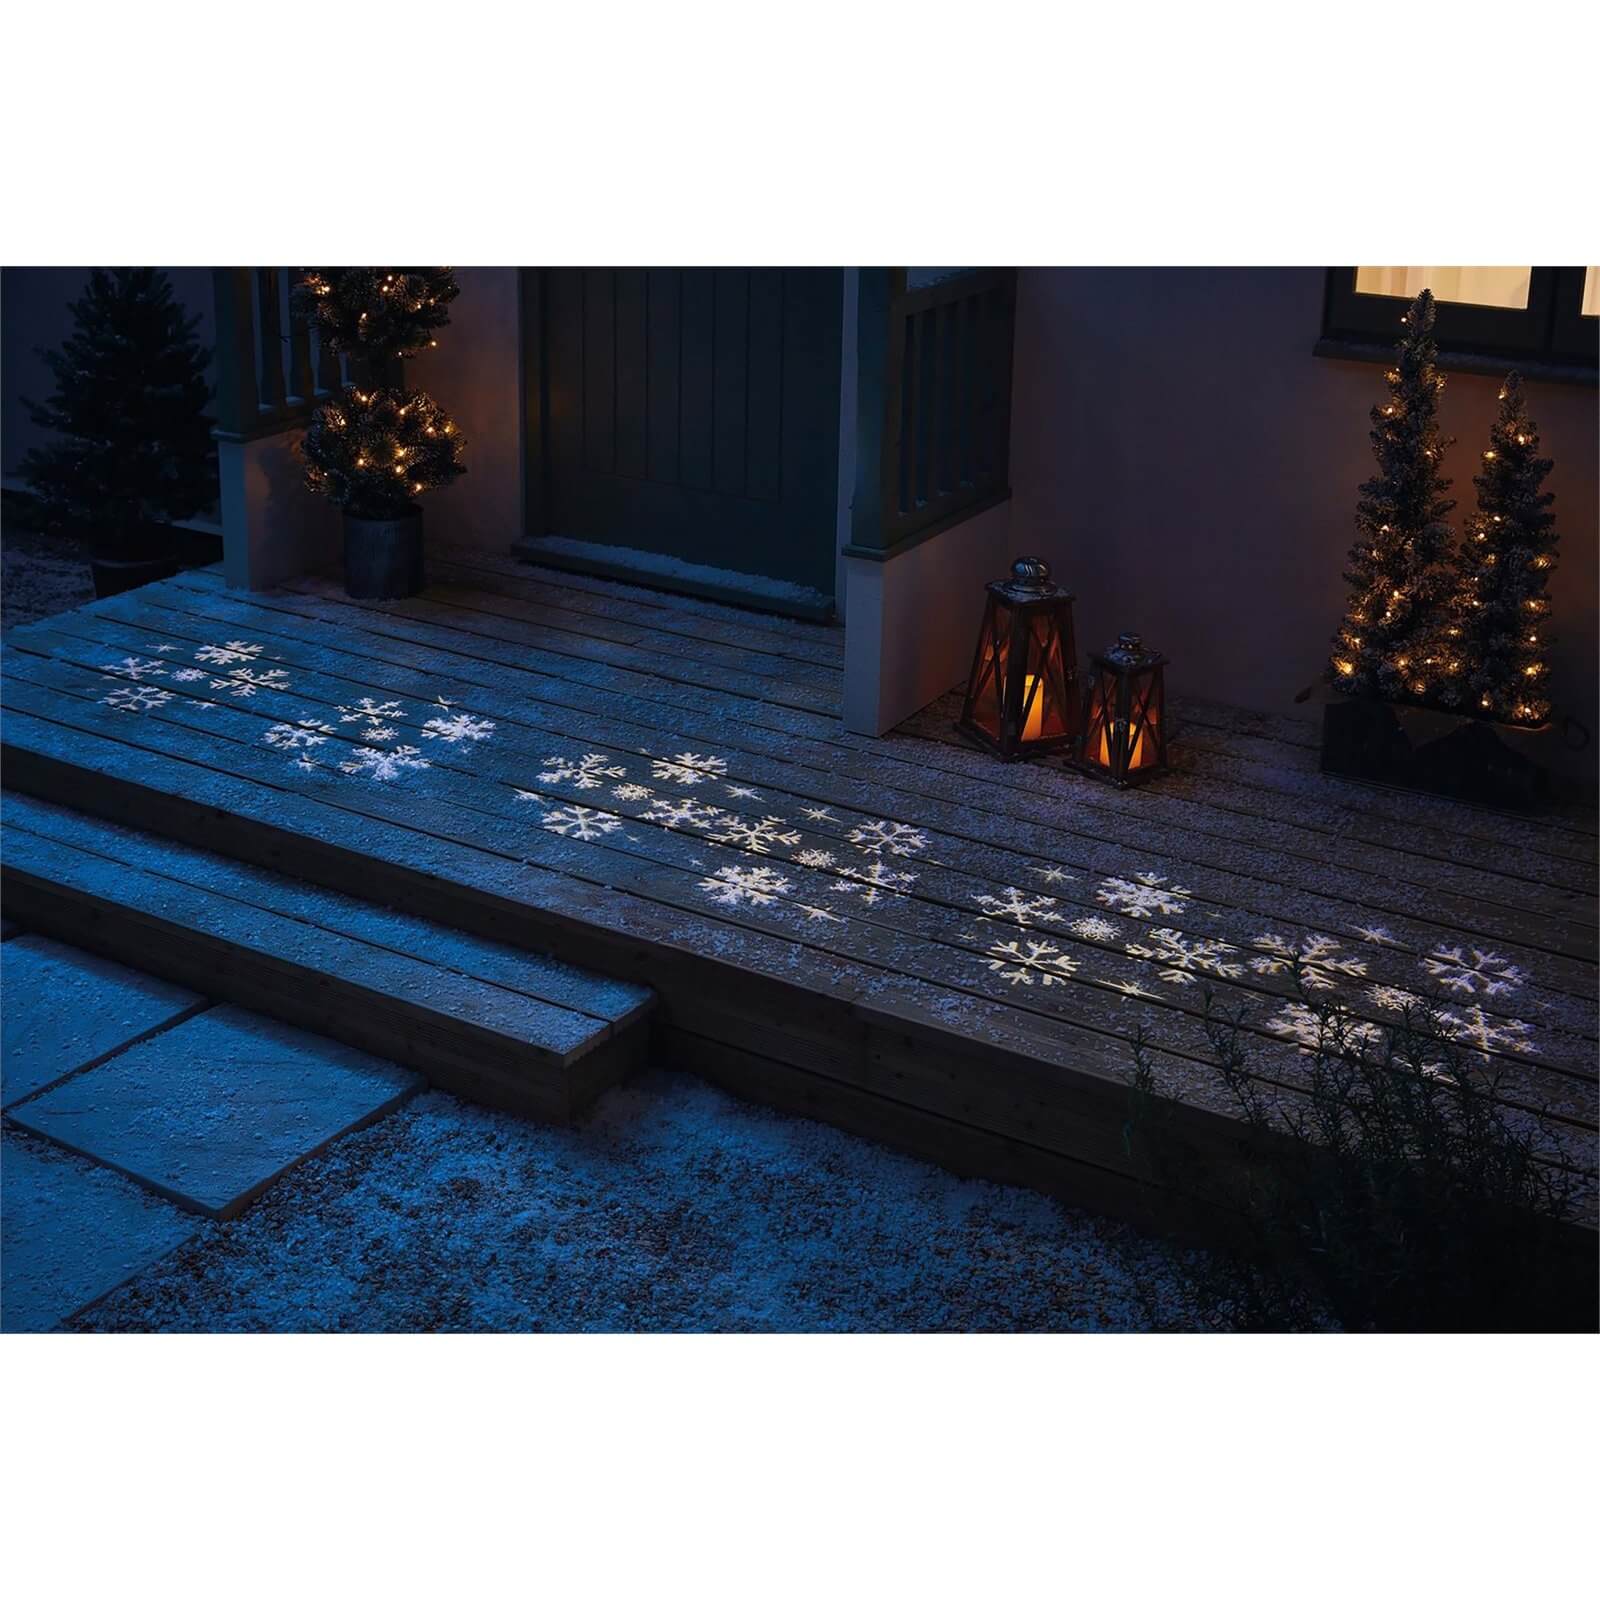 Snowflake LED Projector